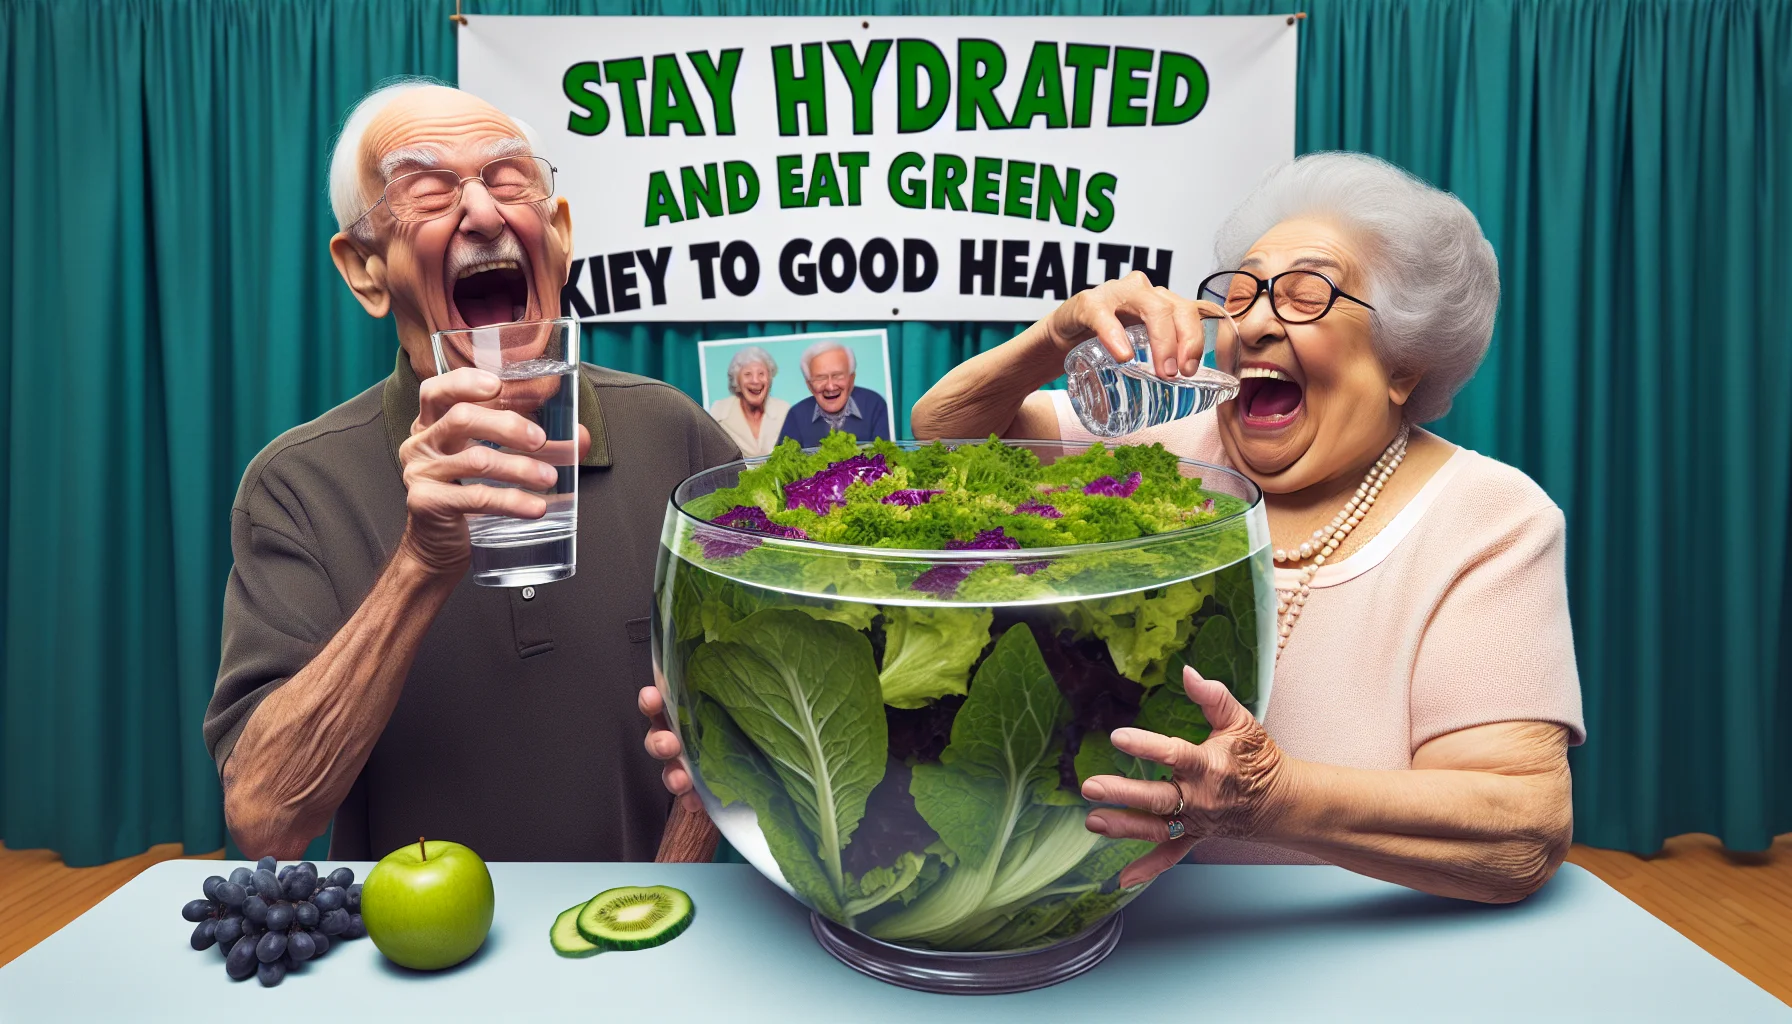 Create a comical, realistic image featuring an old Caucasian man and an elderly Hispanic woman at an 'Over 60s' health fair. The man is laughingly trying to gulp down an enormous glass filled with water, while the woman shows off a gigantic salad. A sign behind them reads 'Stay Hydrated and Eat Greens: Key to Good Health', indicating the importance of hydration and healthy eating in senior years.